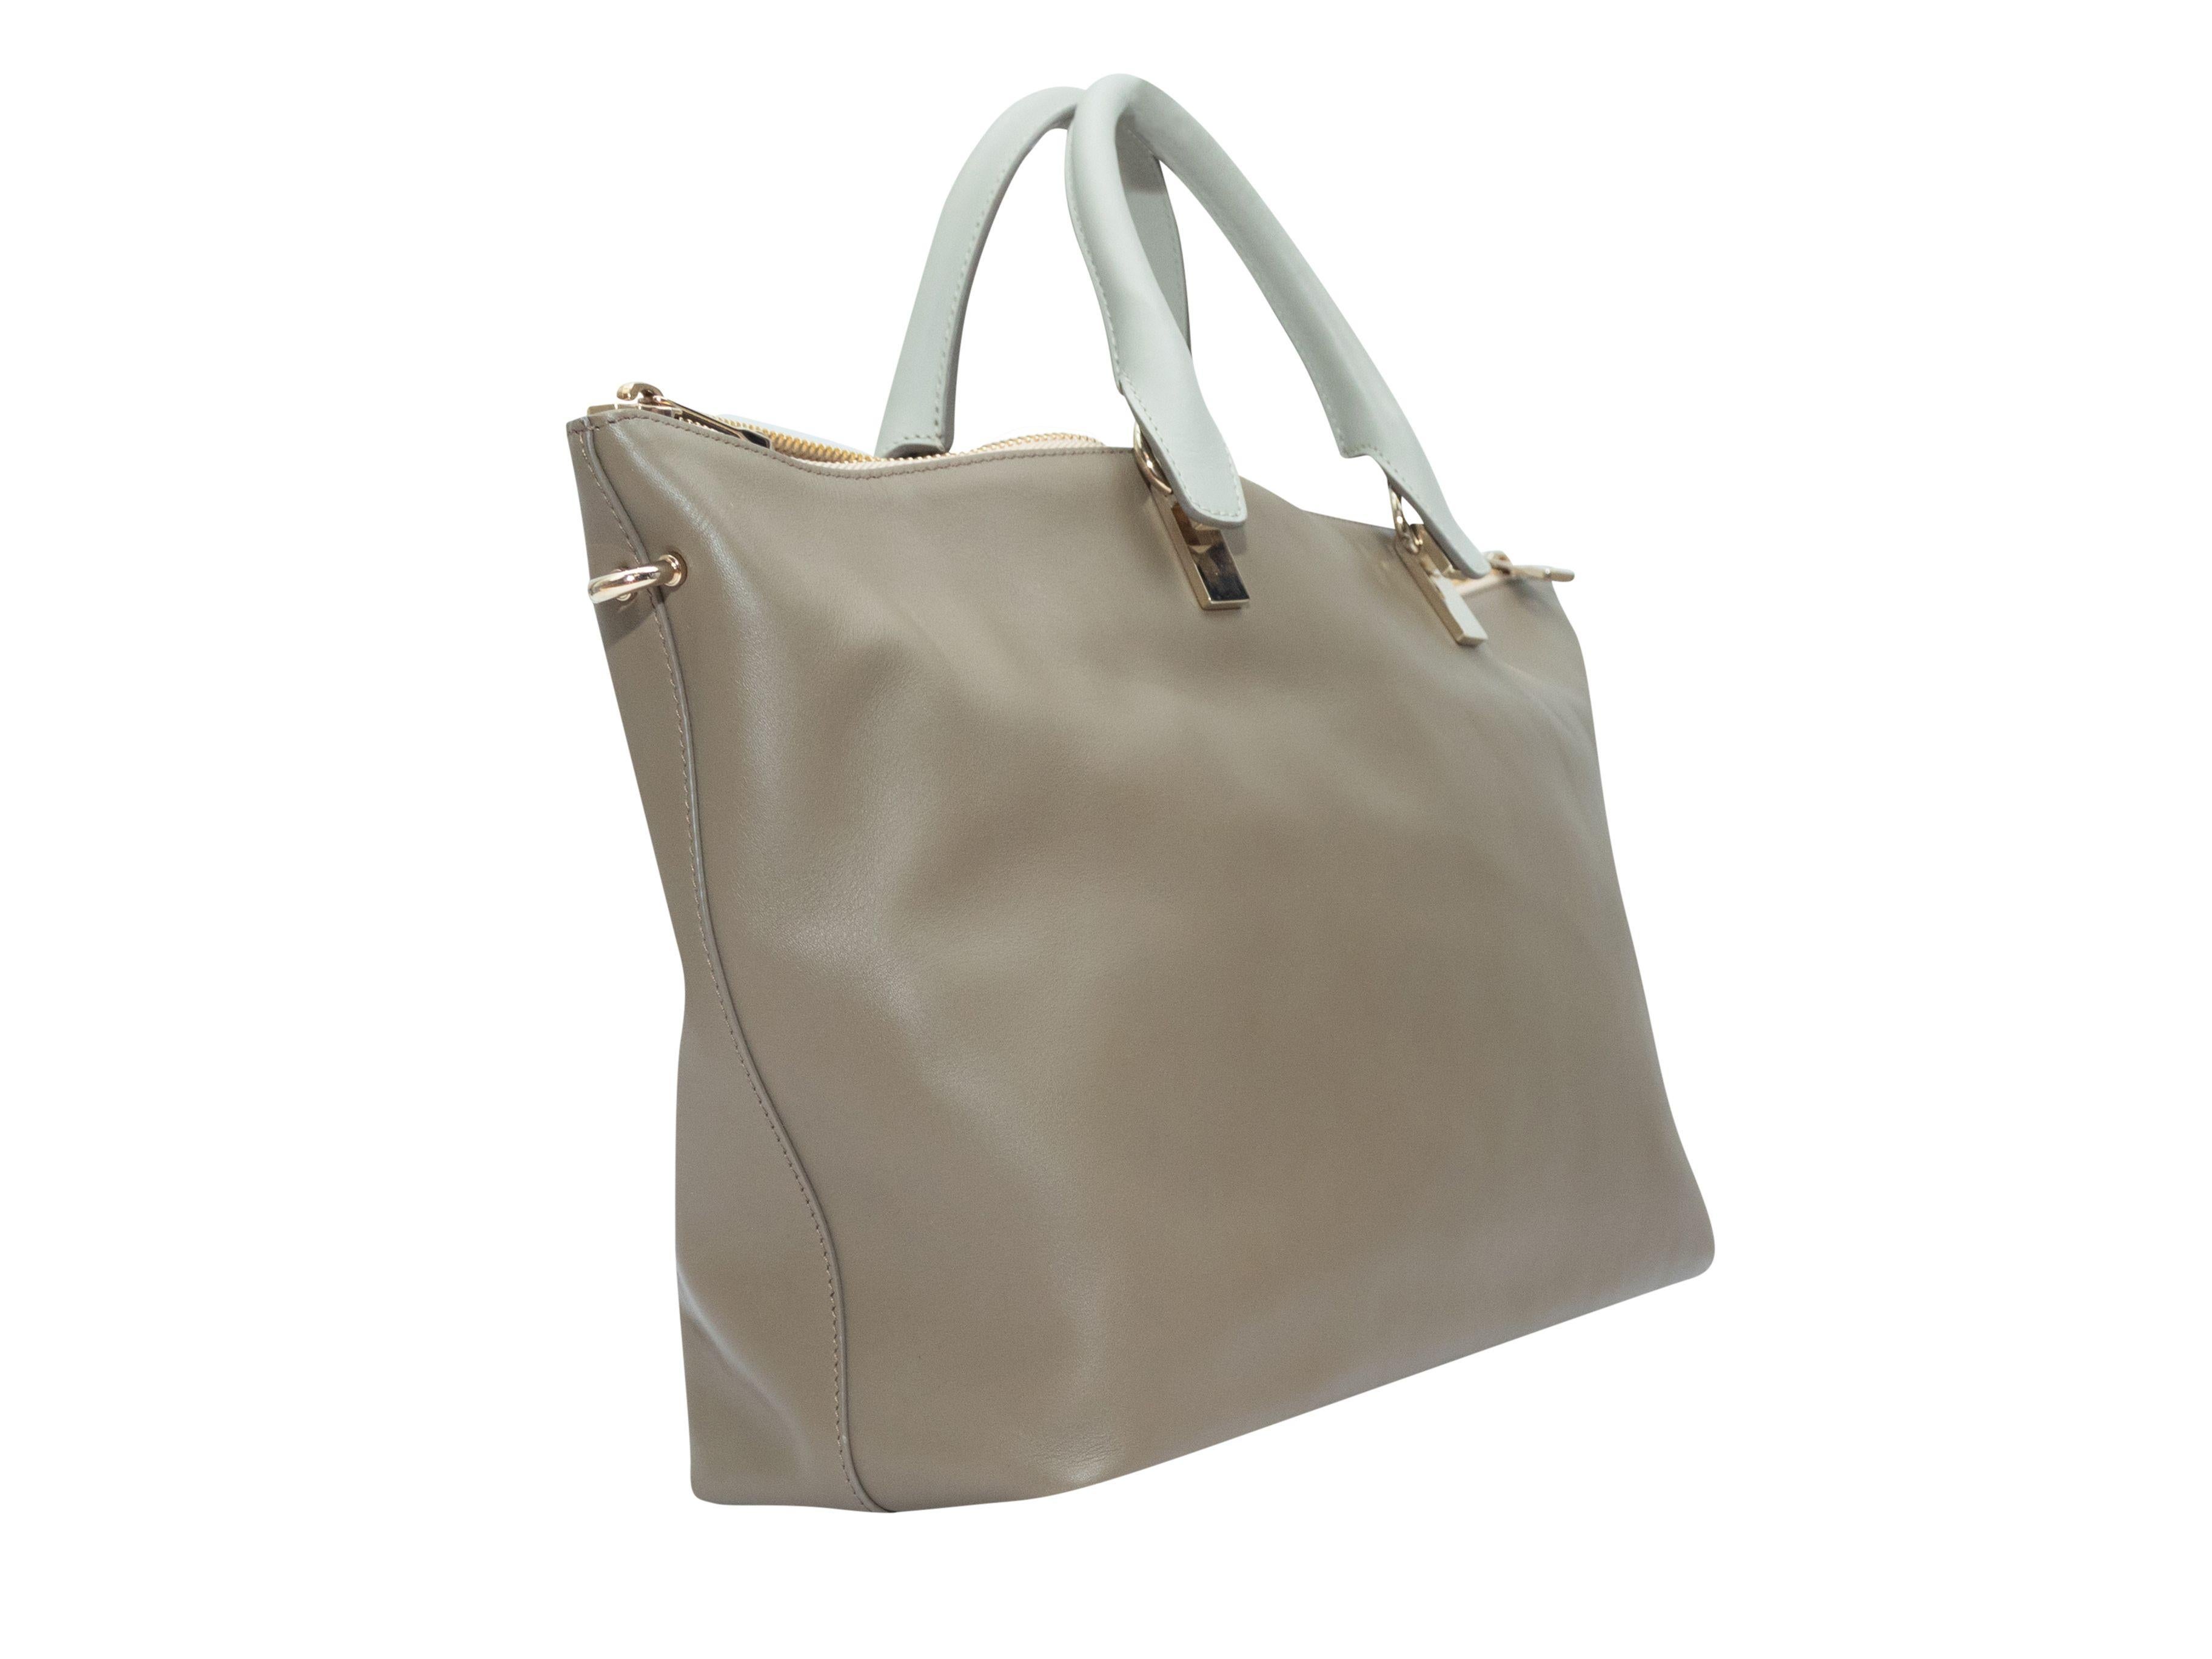 Women's Chloe Taupe Baylee Leather Tote Bag